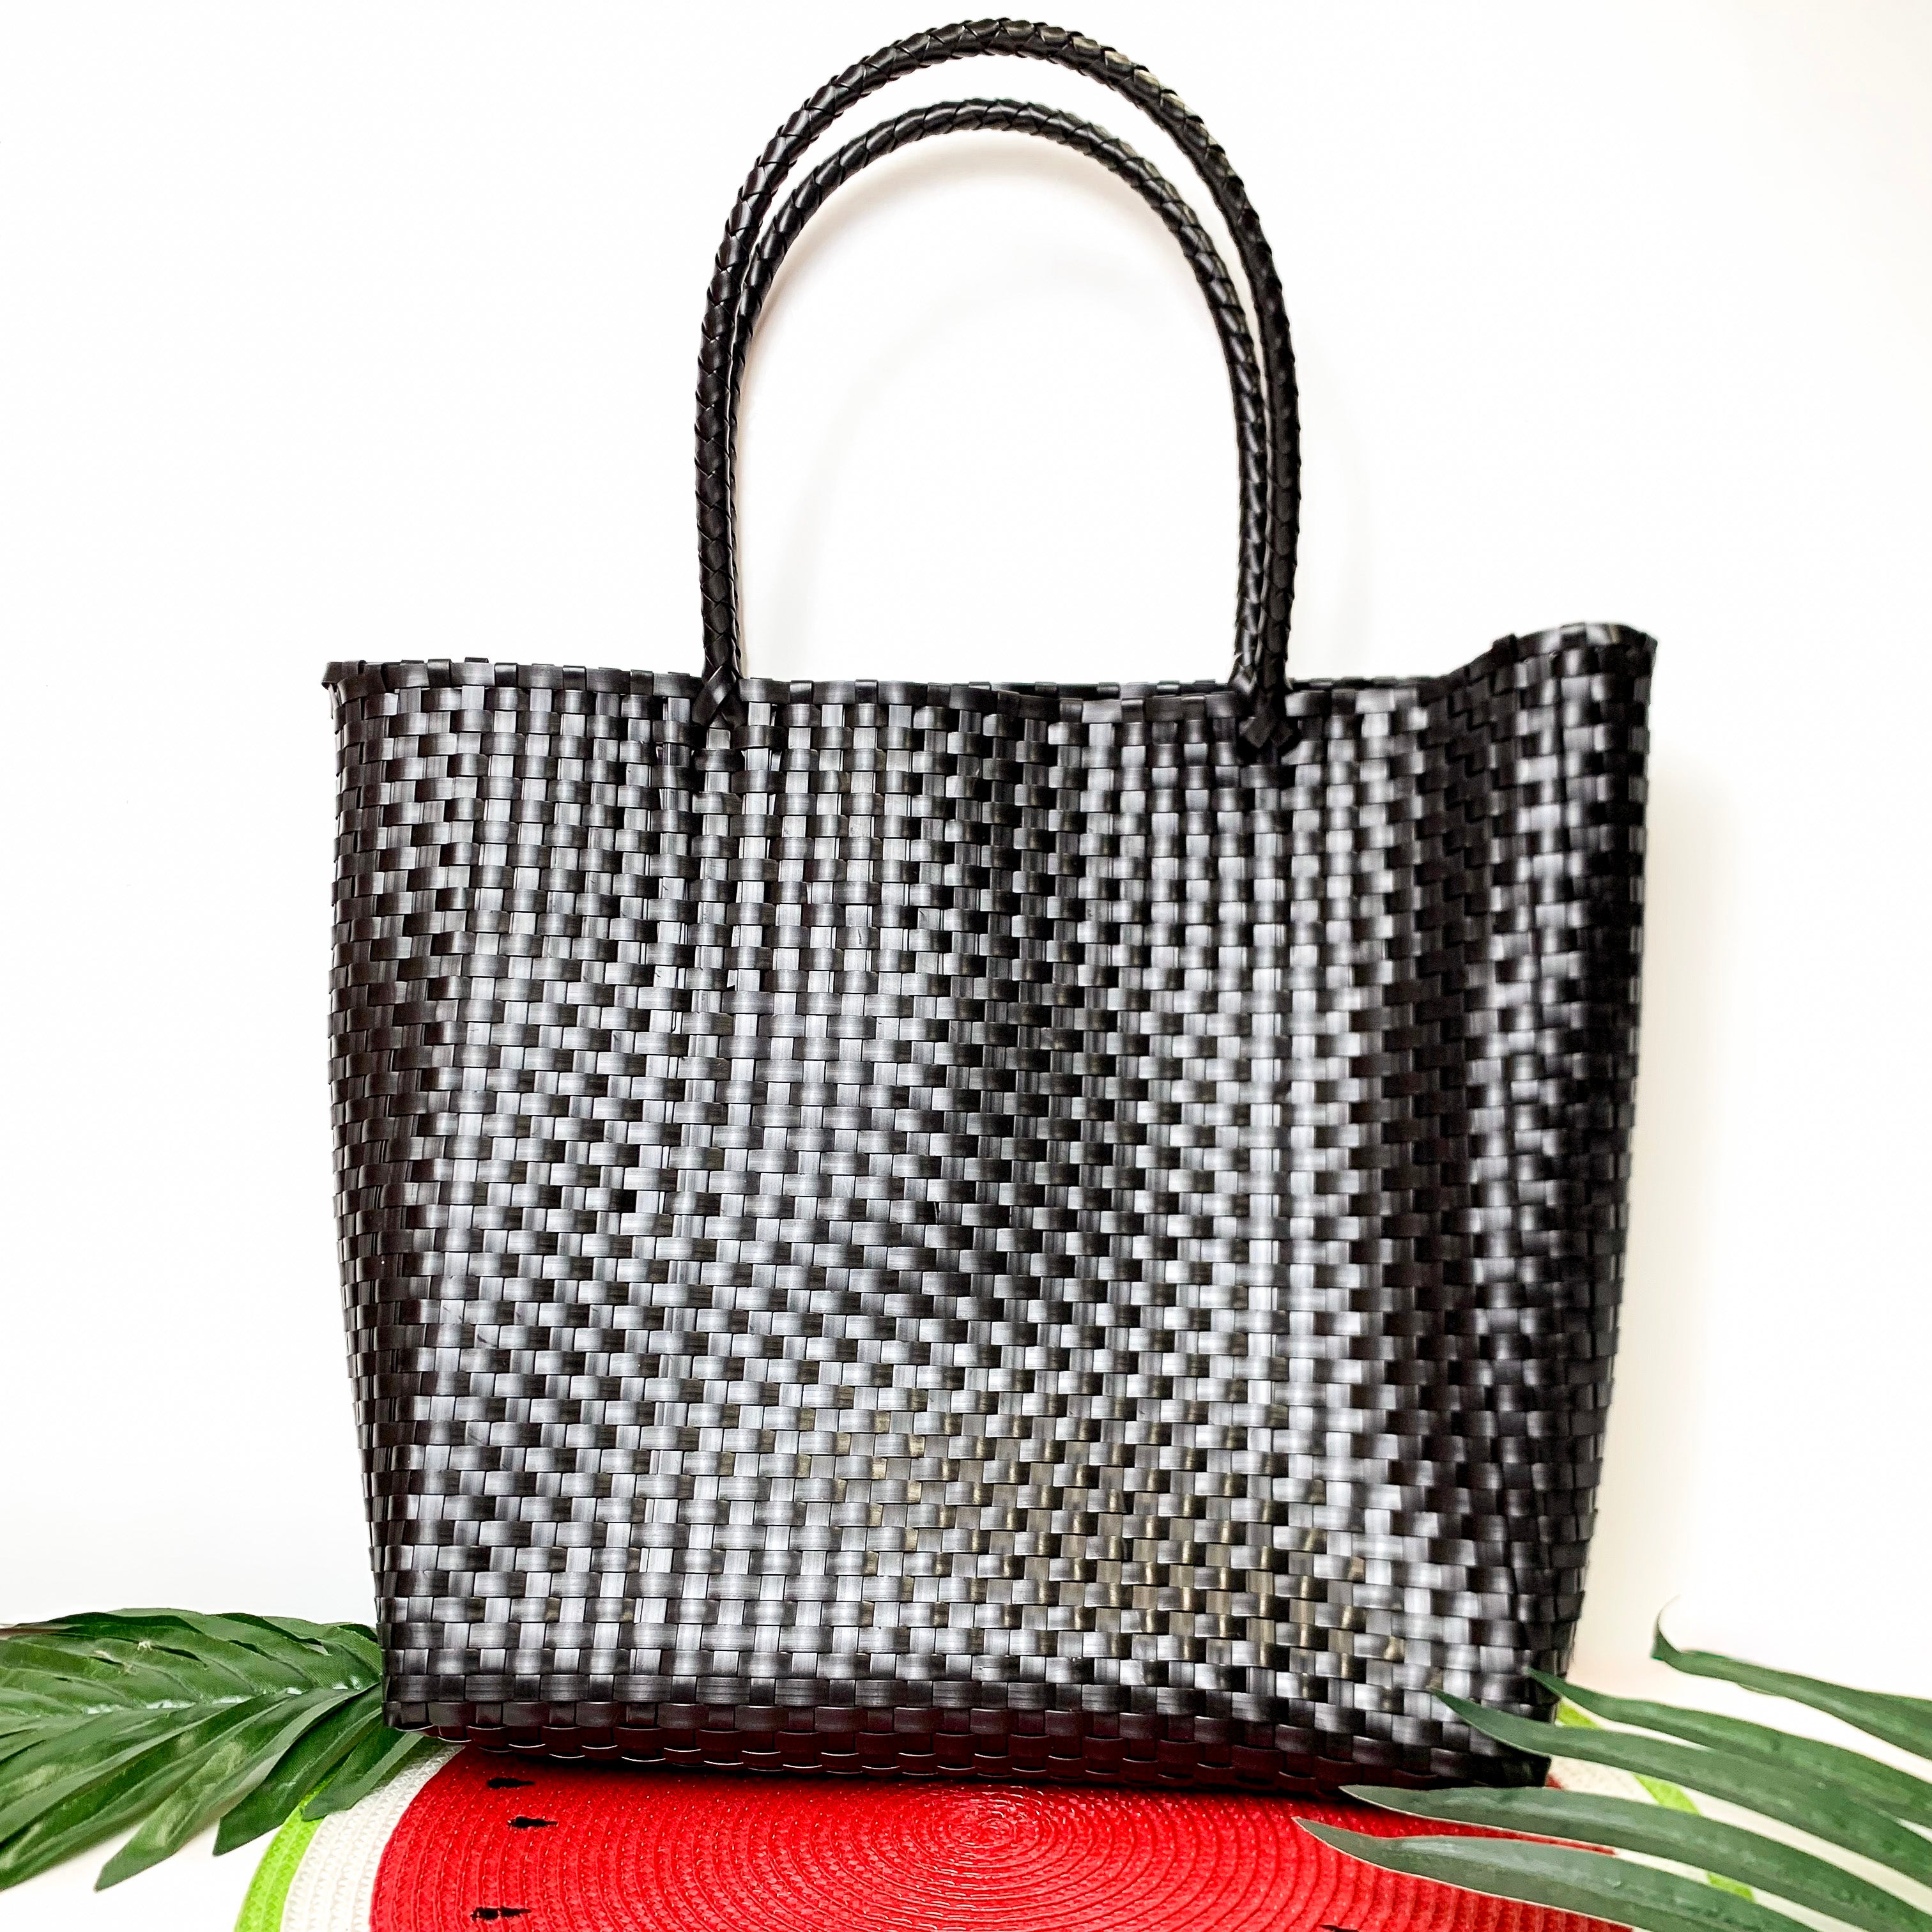 Coastal Couture Carryall Tote Bag in Black - Giddy Up Glamour Boutique